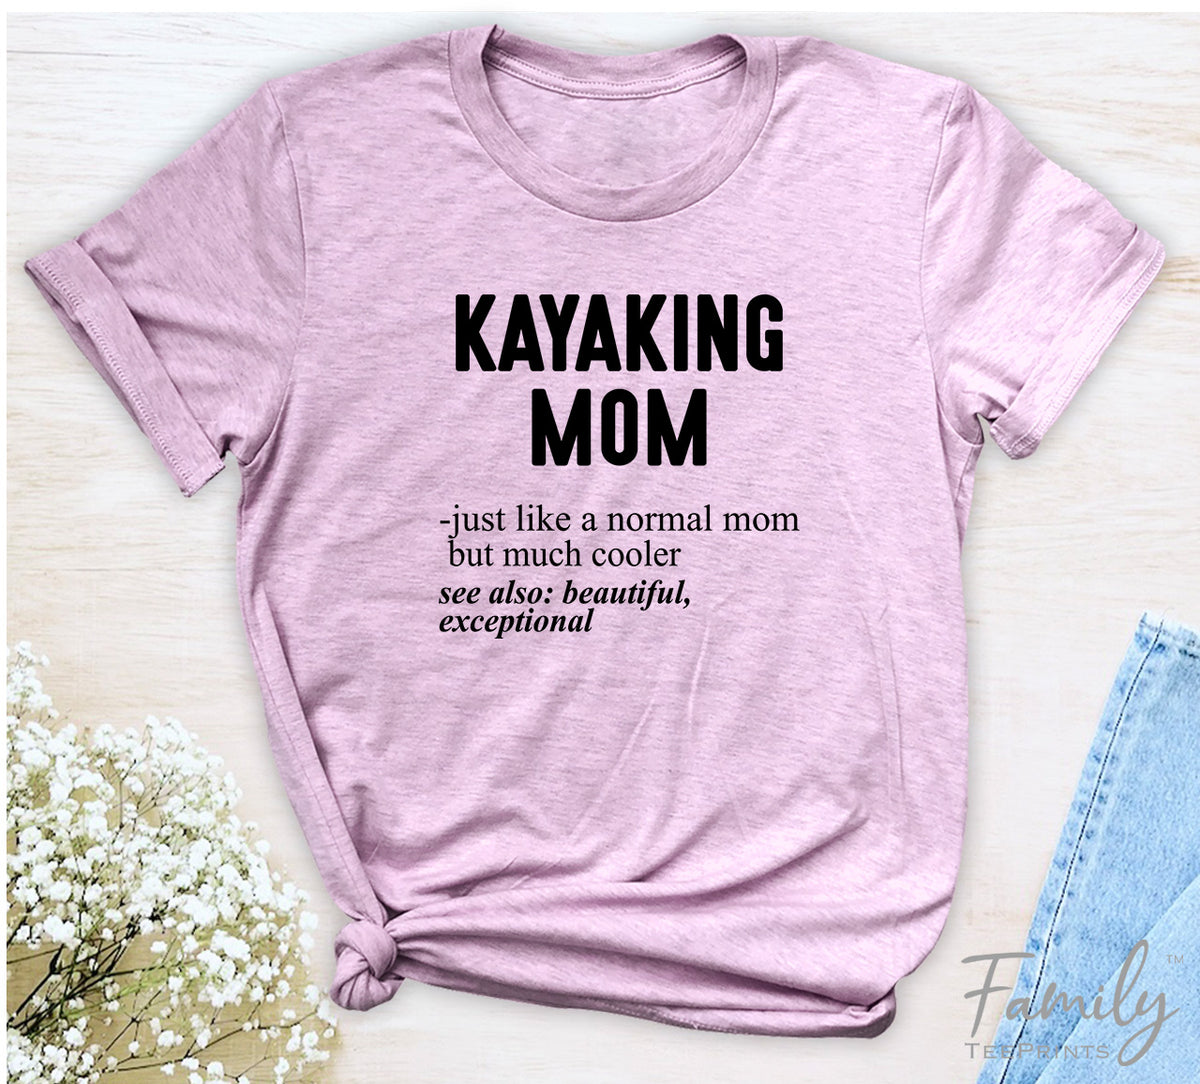 Kayaking Mom Just Like A Normal Mom - Unisex T-shirt - Kayaking Mom Shirt - Gift For Kayaking Mom - familyteeprints